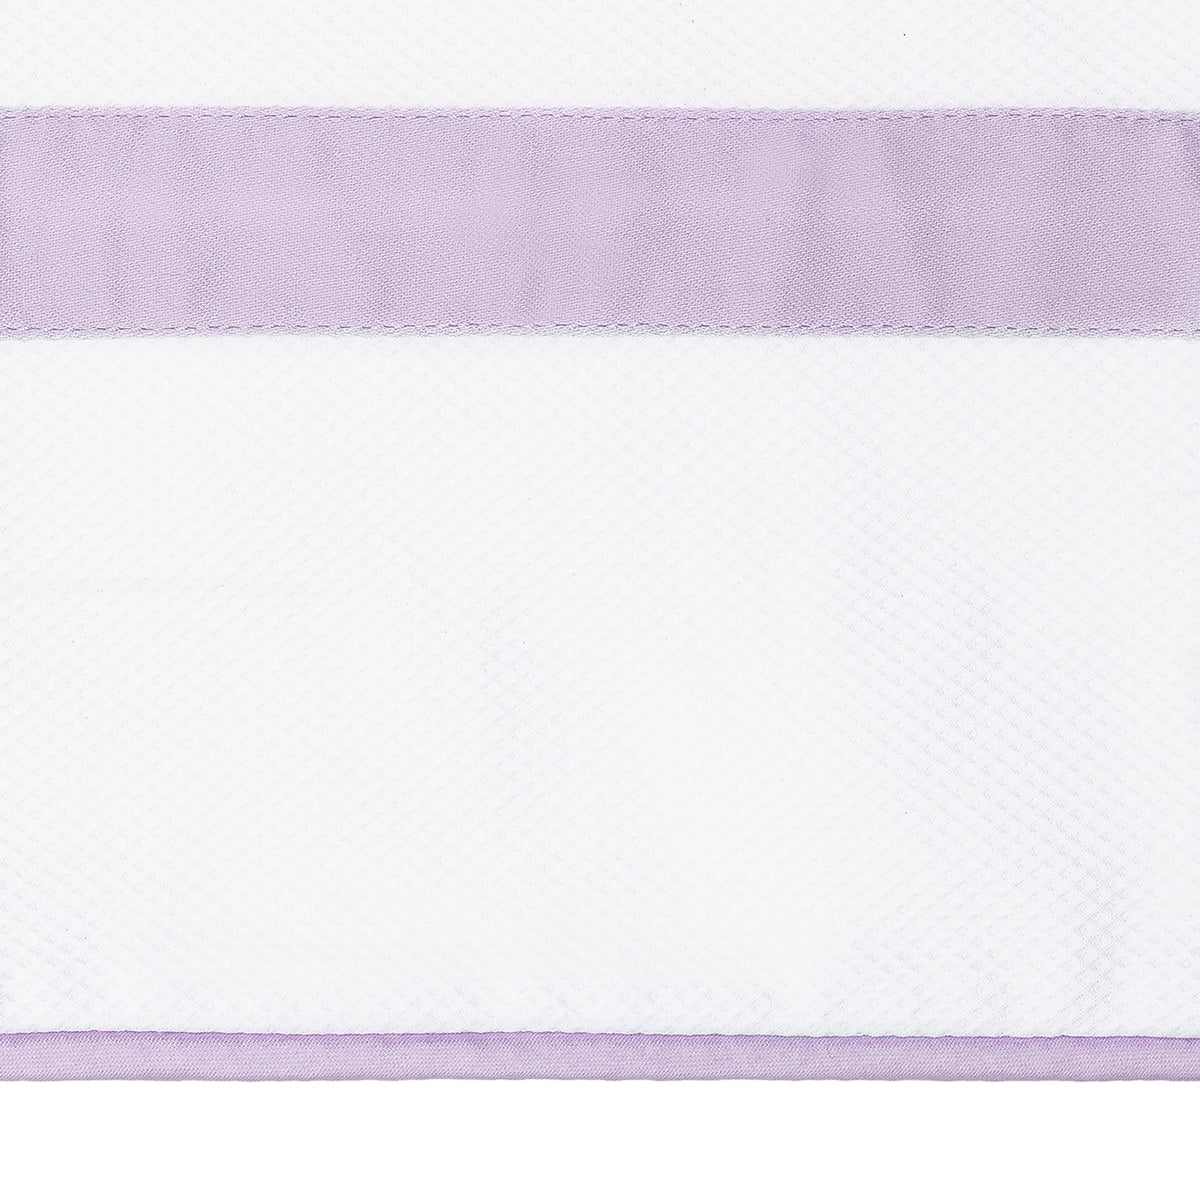 Swatch Sample of Matouk Louise Pique Bedding in Color Violet